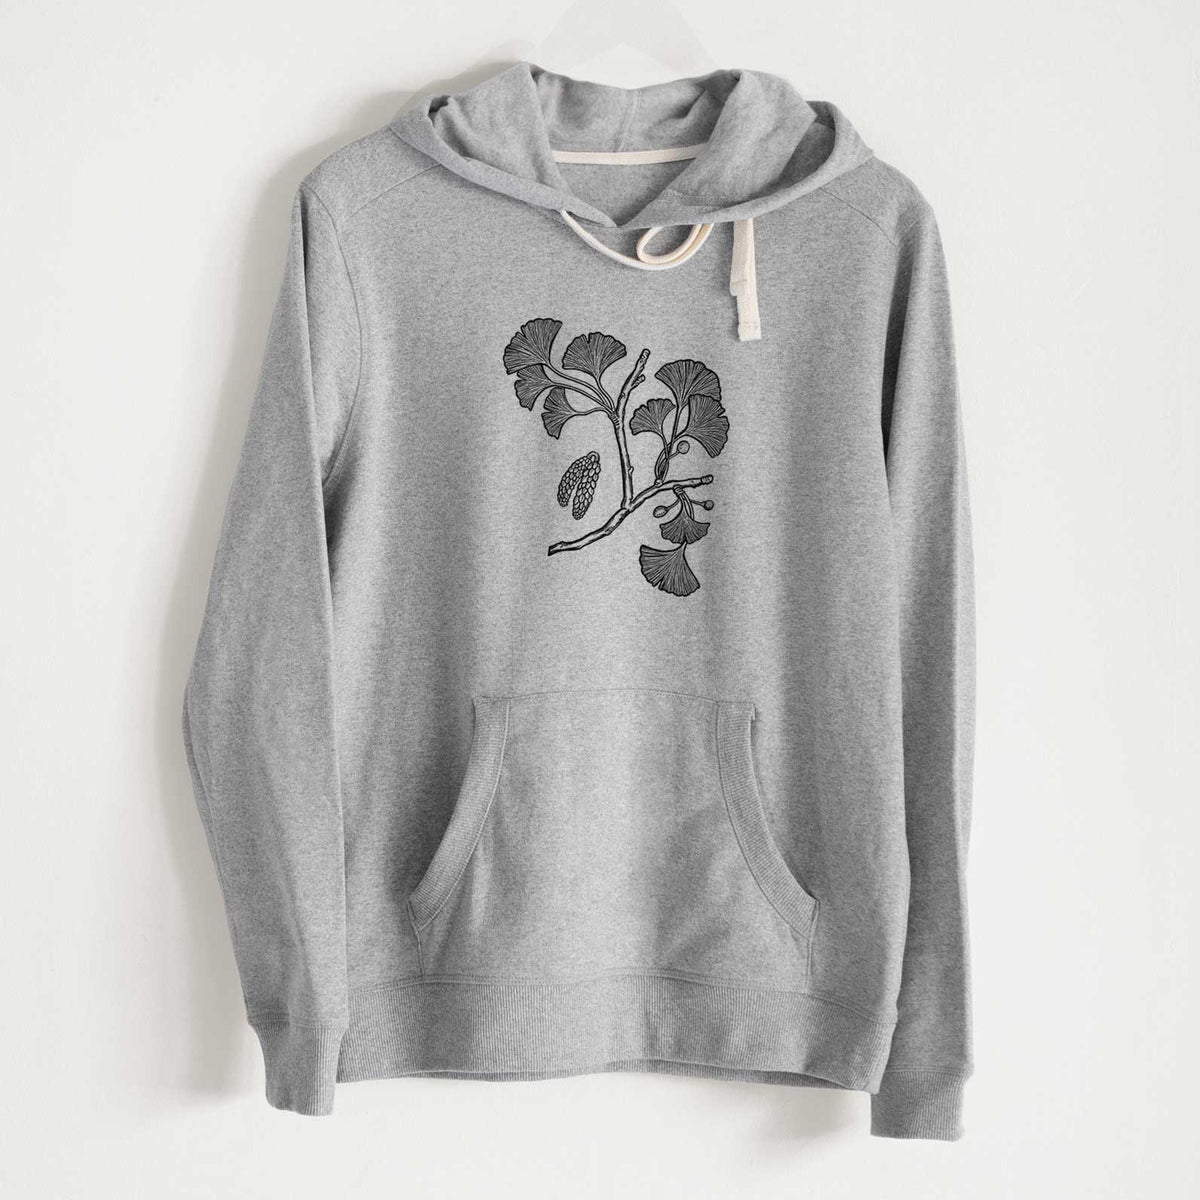 Ginkgo Biloba - Ginkgo Tree Stem with Leaves - Unisex Recycled Hoodie - CLOSEOUT - FINAL SALE